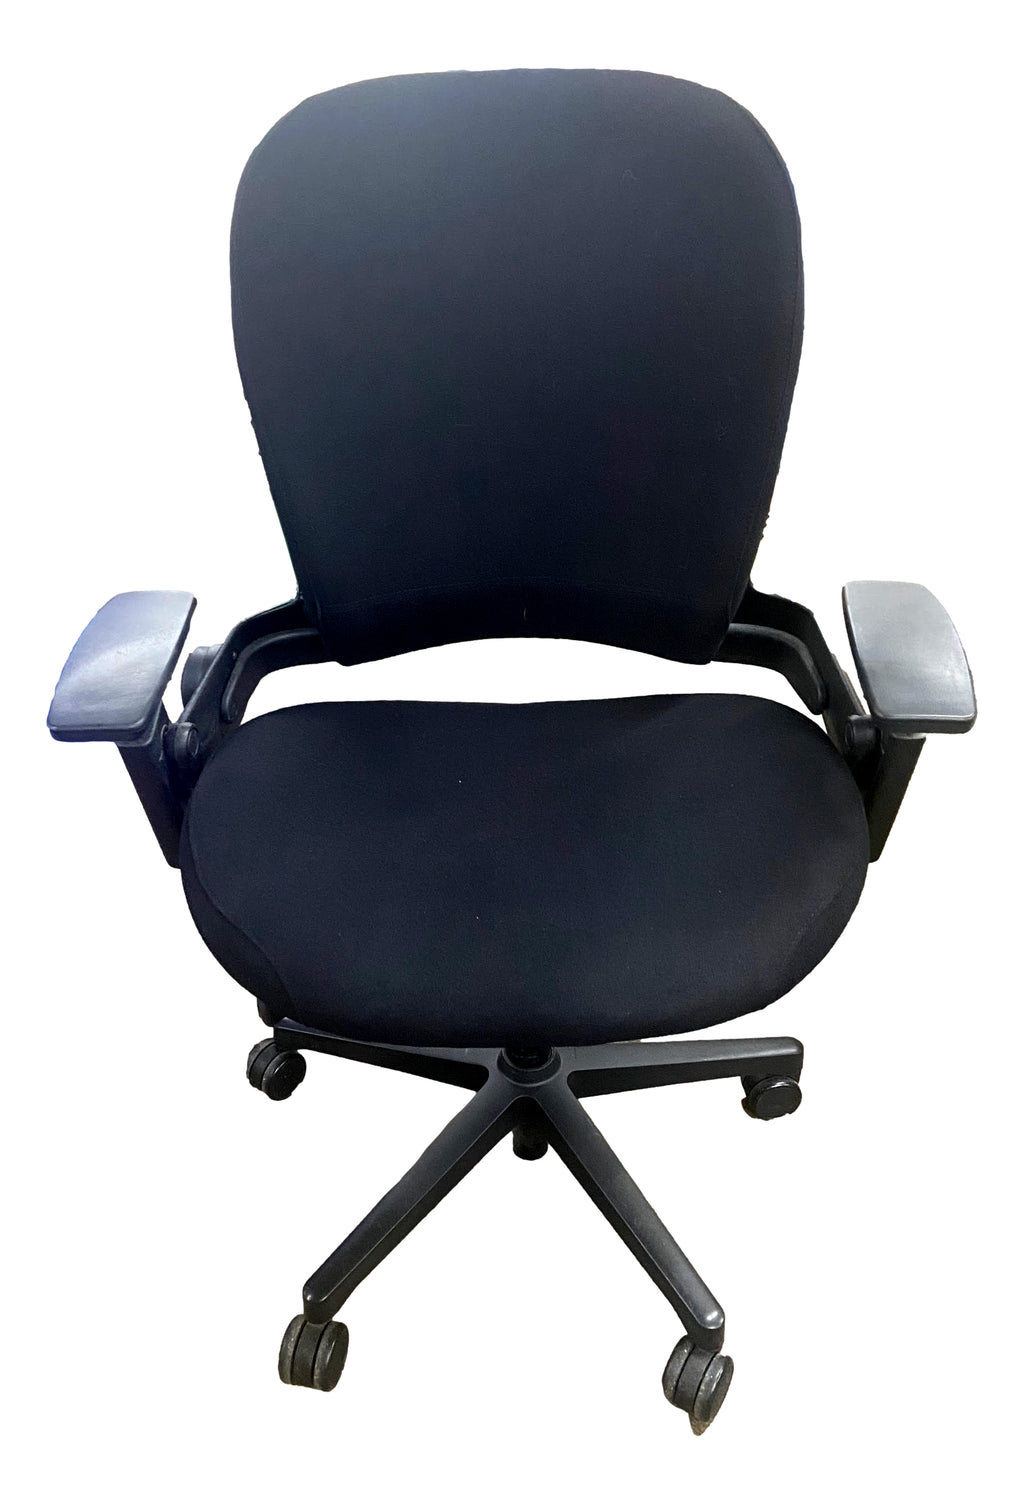 Pre-Owned Steelcase Leap Plus